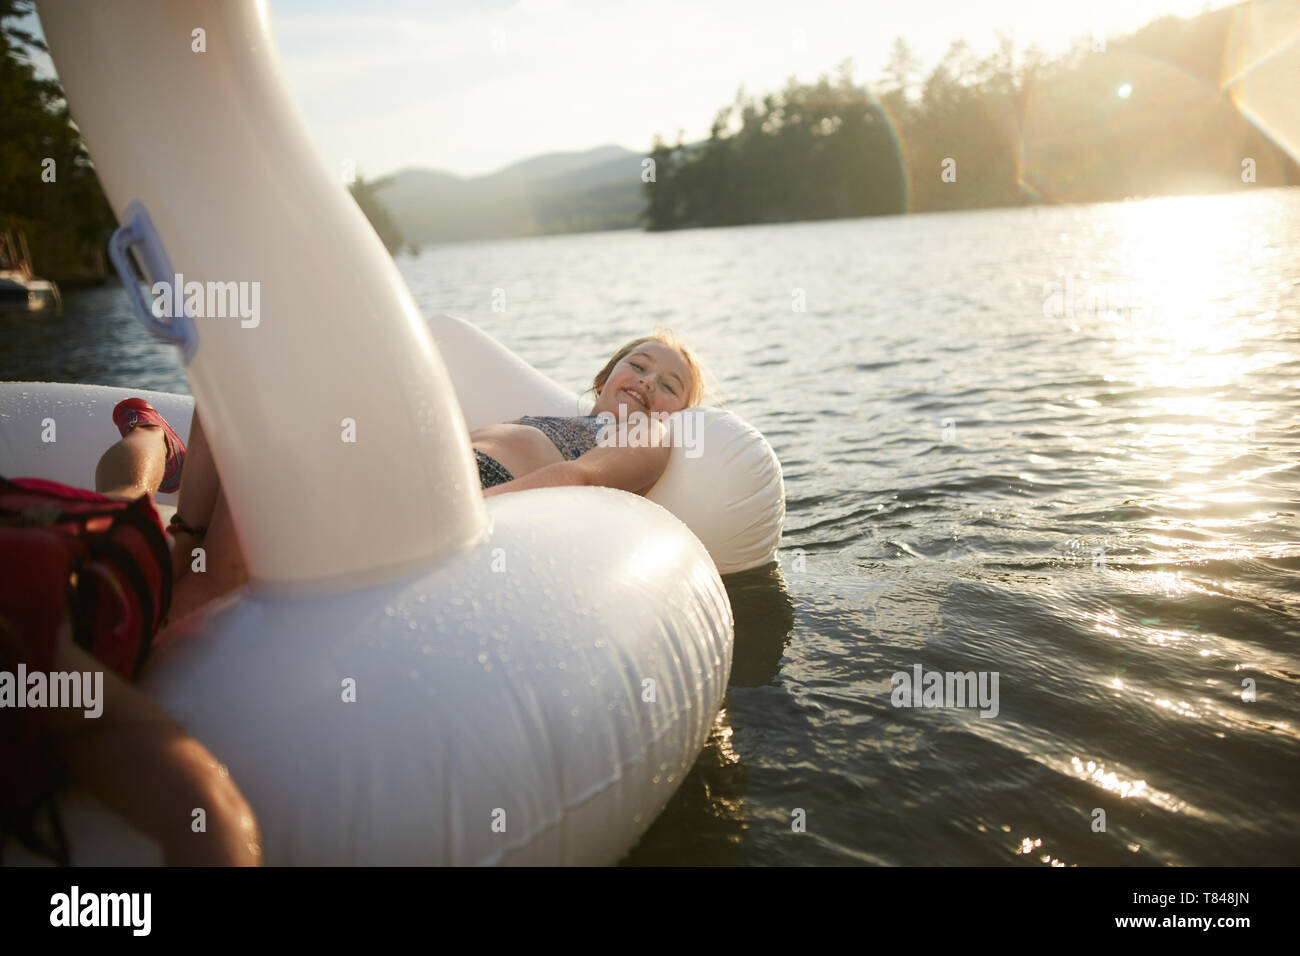 Girls playing on inflatable swan in lake Stock Photo